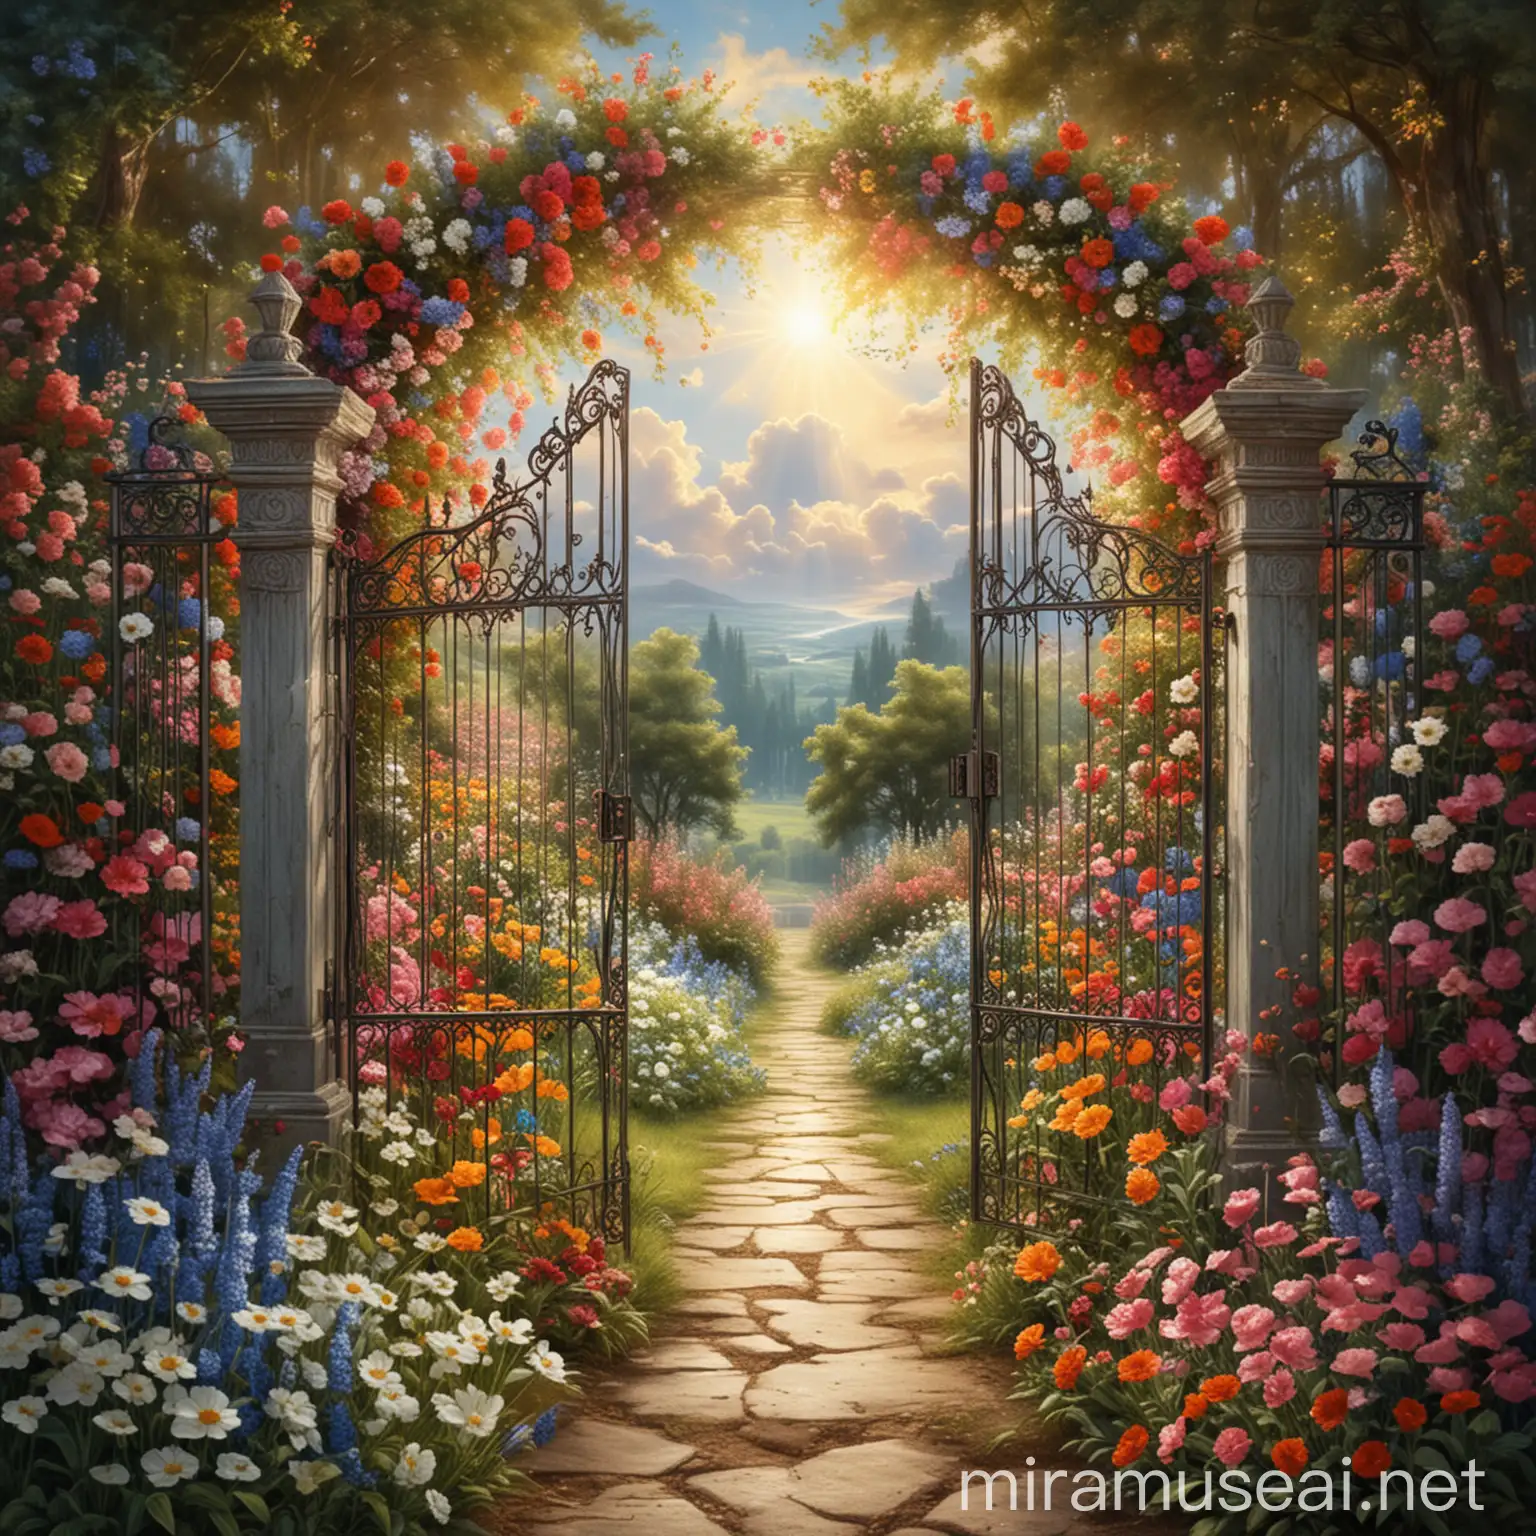 heaven's gates opening to a garden of flowers
